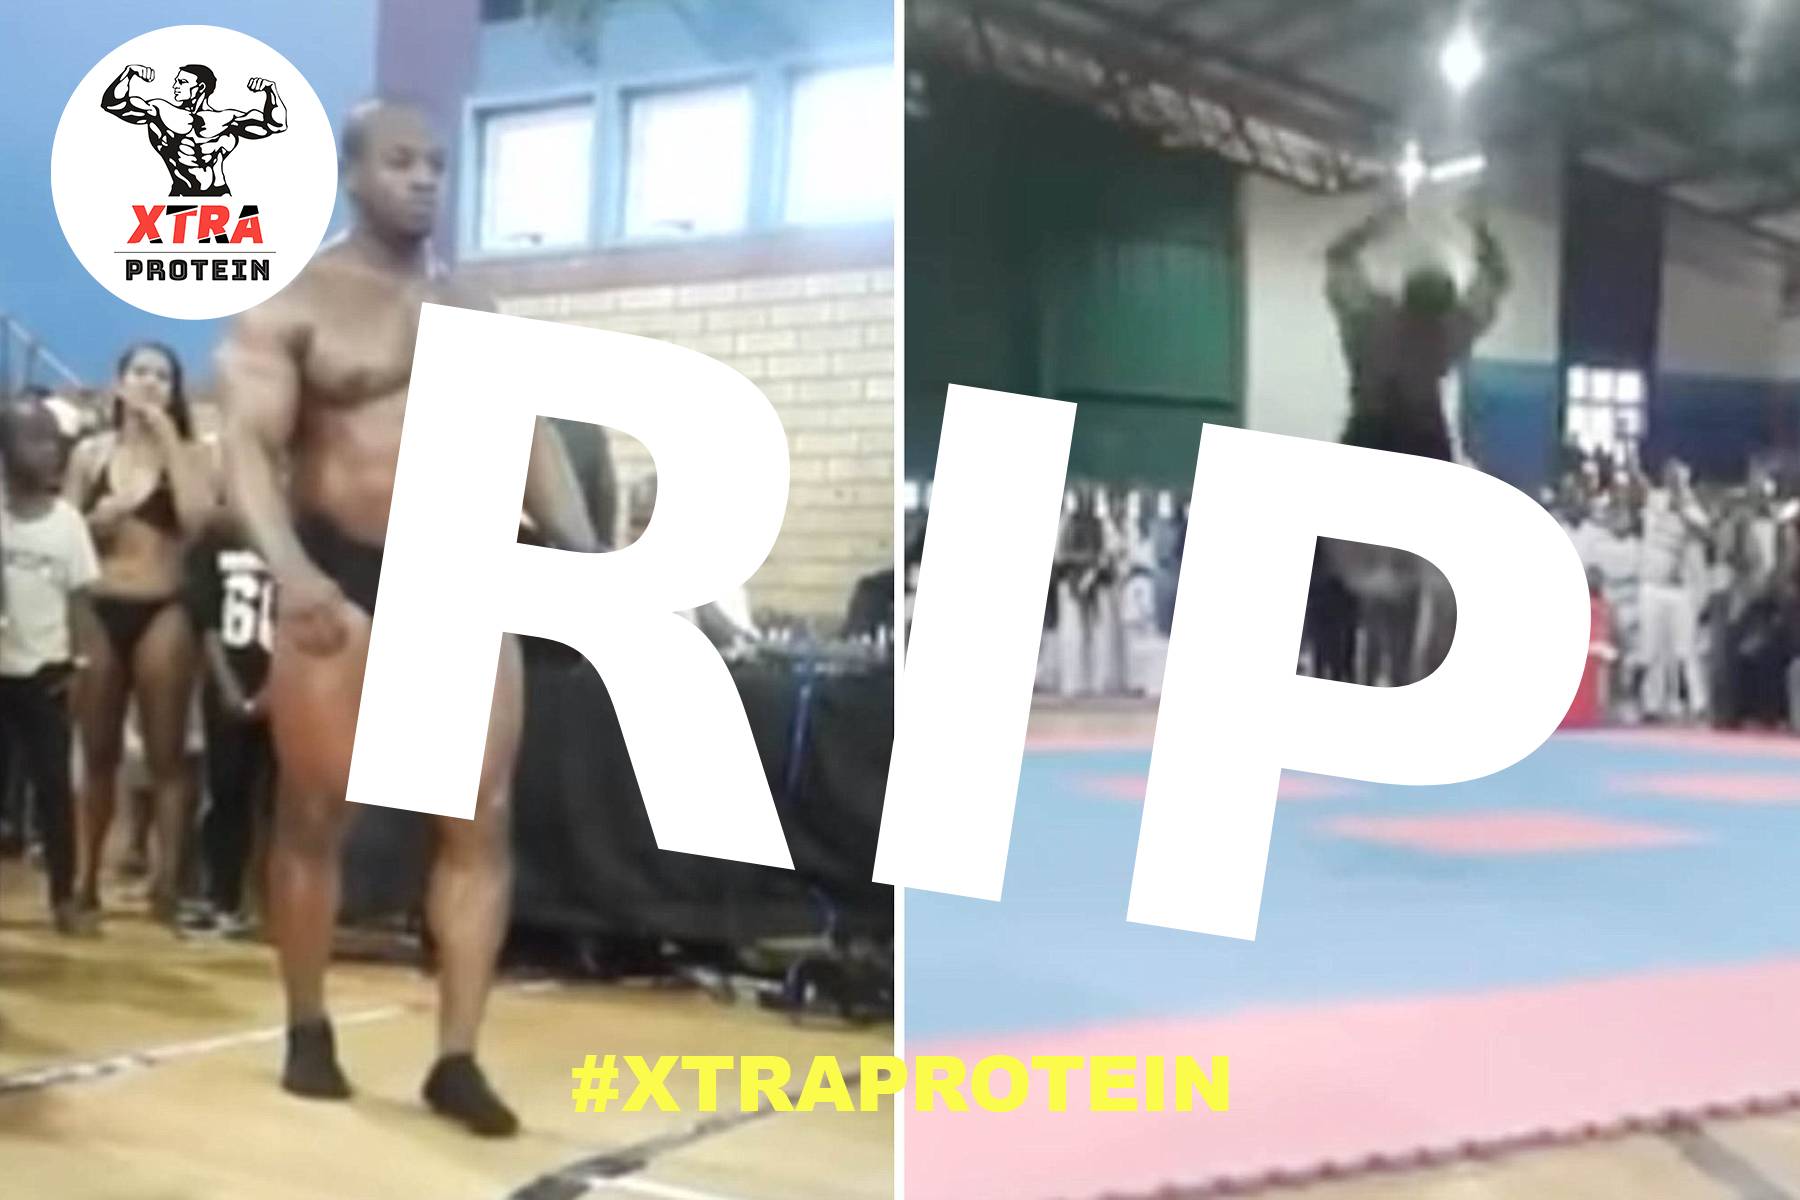 South African Bodybuilder Loses Life in Fatal Backflip Accident | Xtra Protein